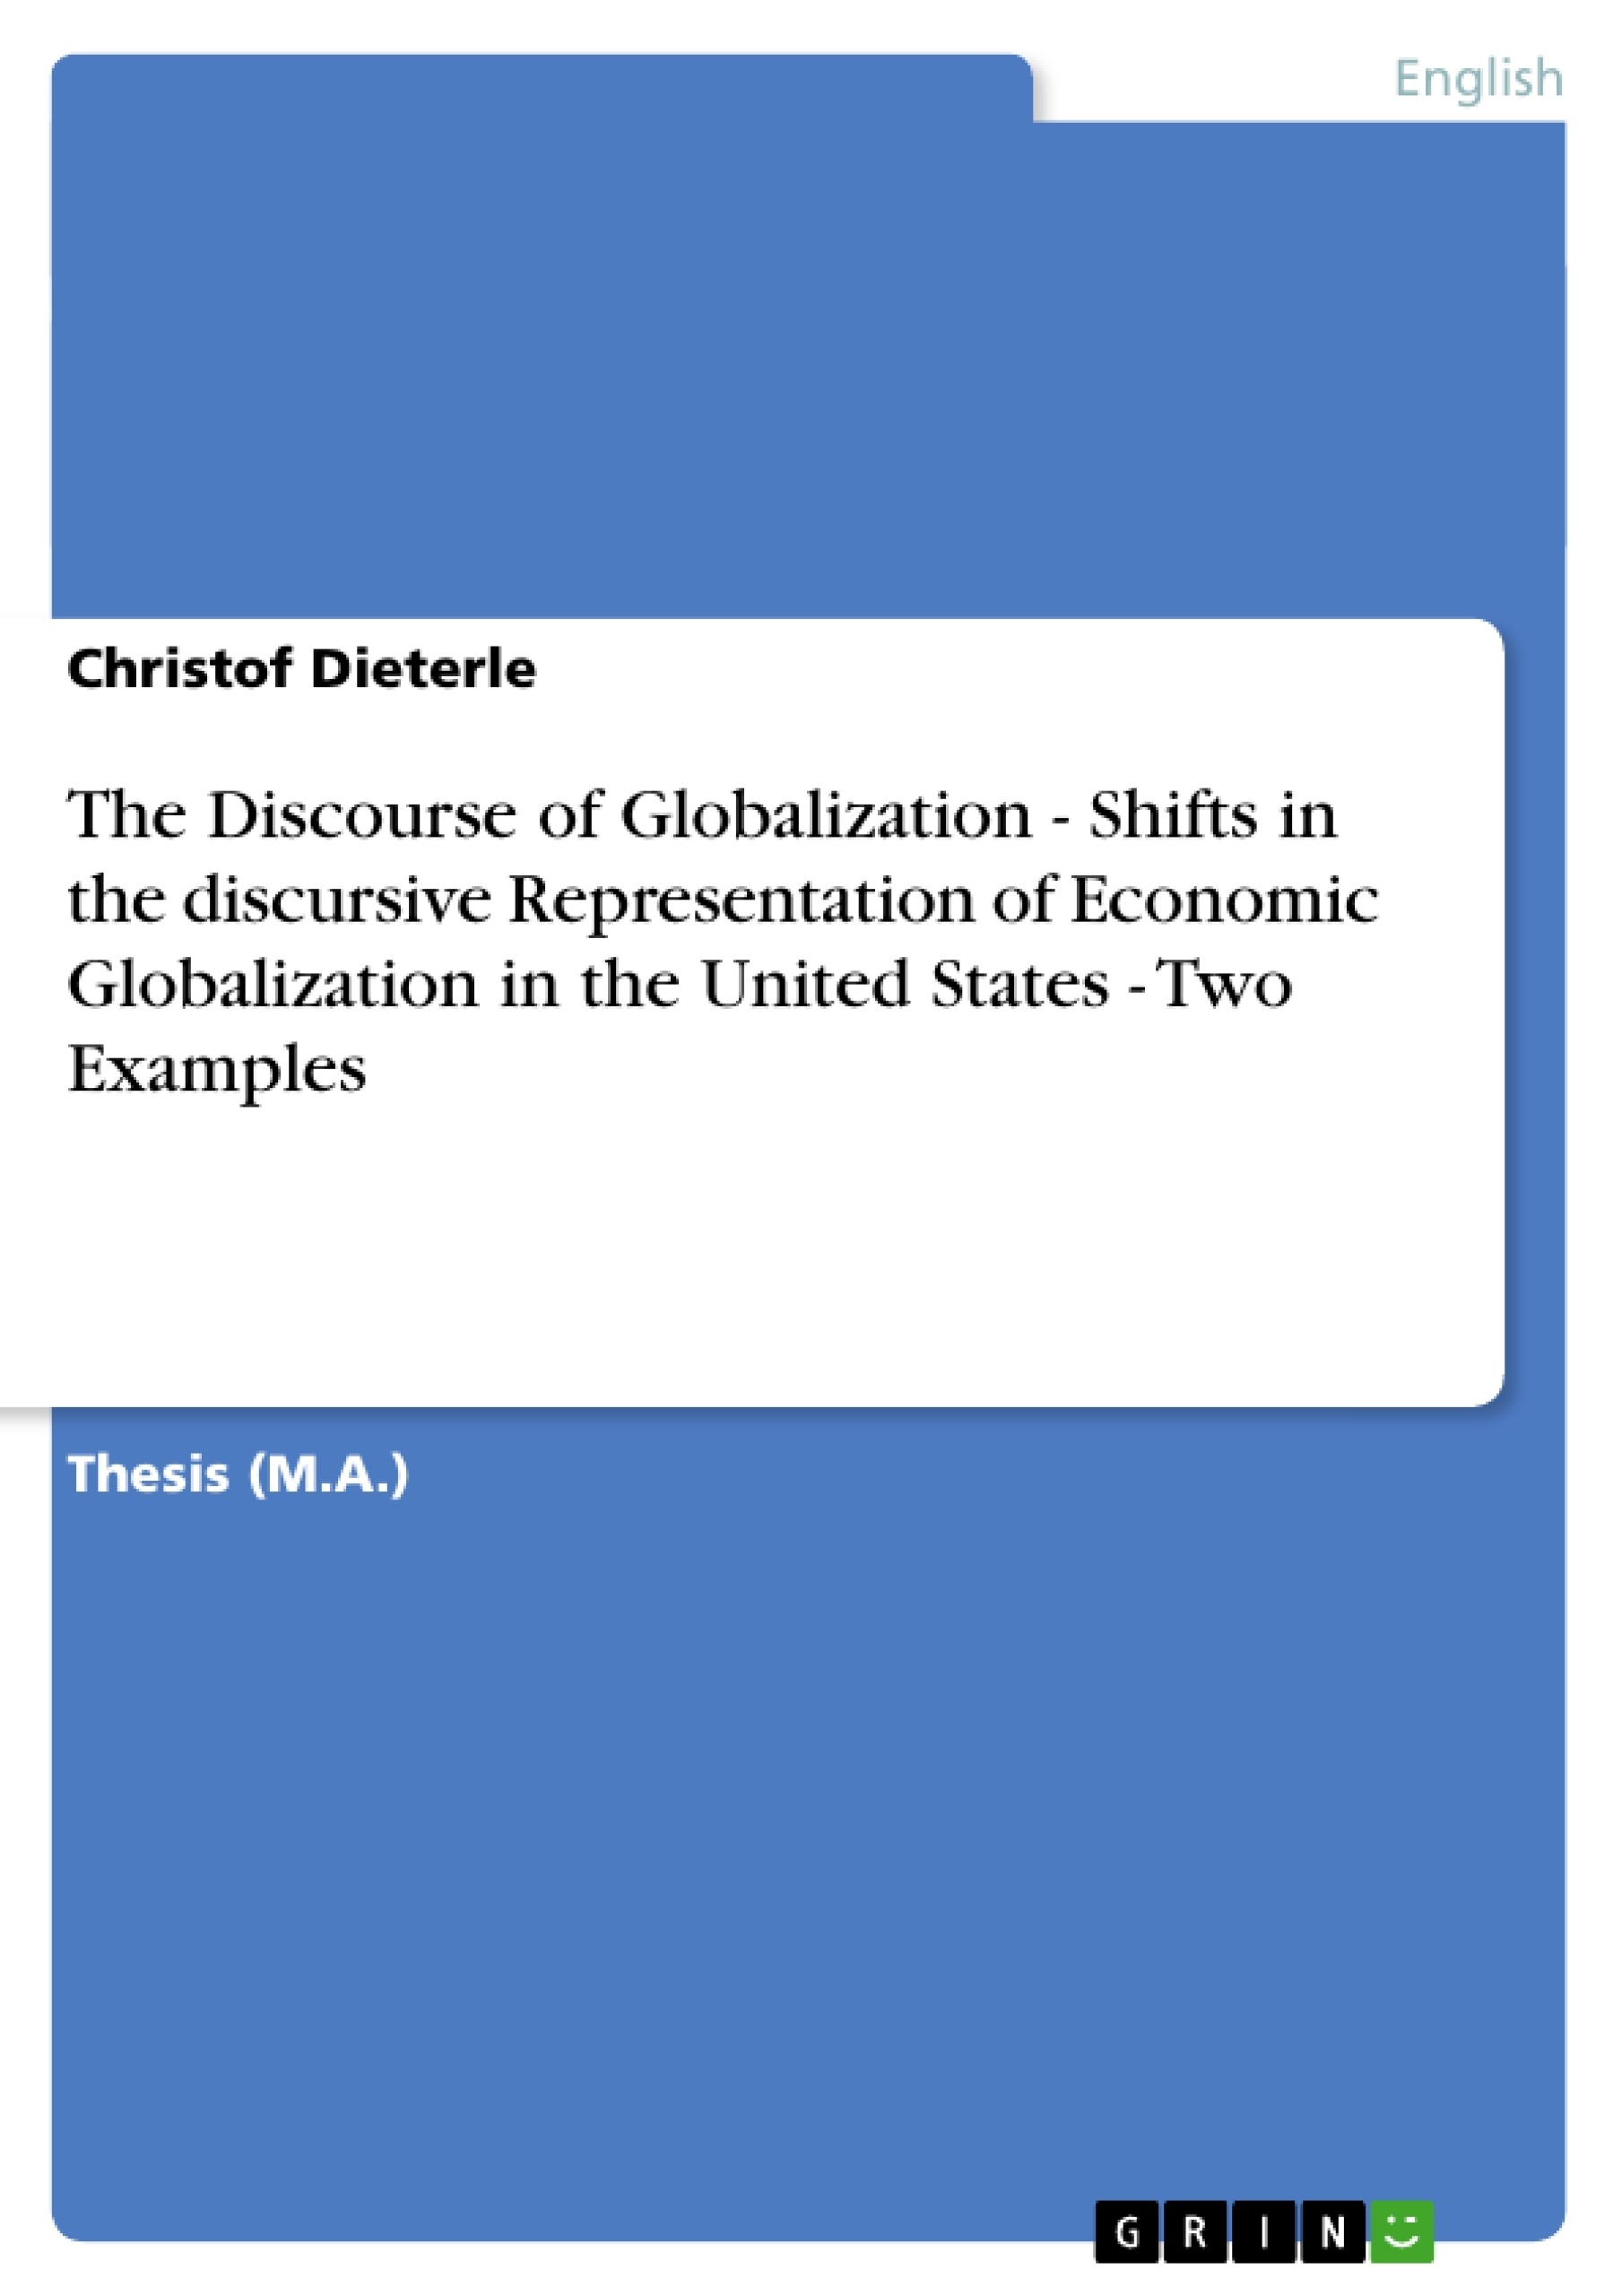 Title: The Discourse of Globalization - Shifts in the discursive Representation of Economic Globalization in the United States - Two Examples